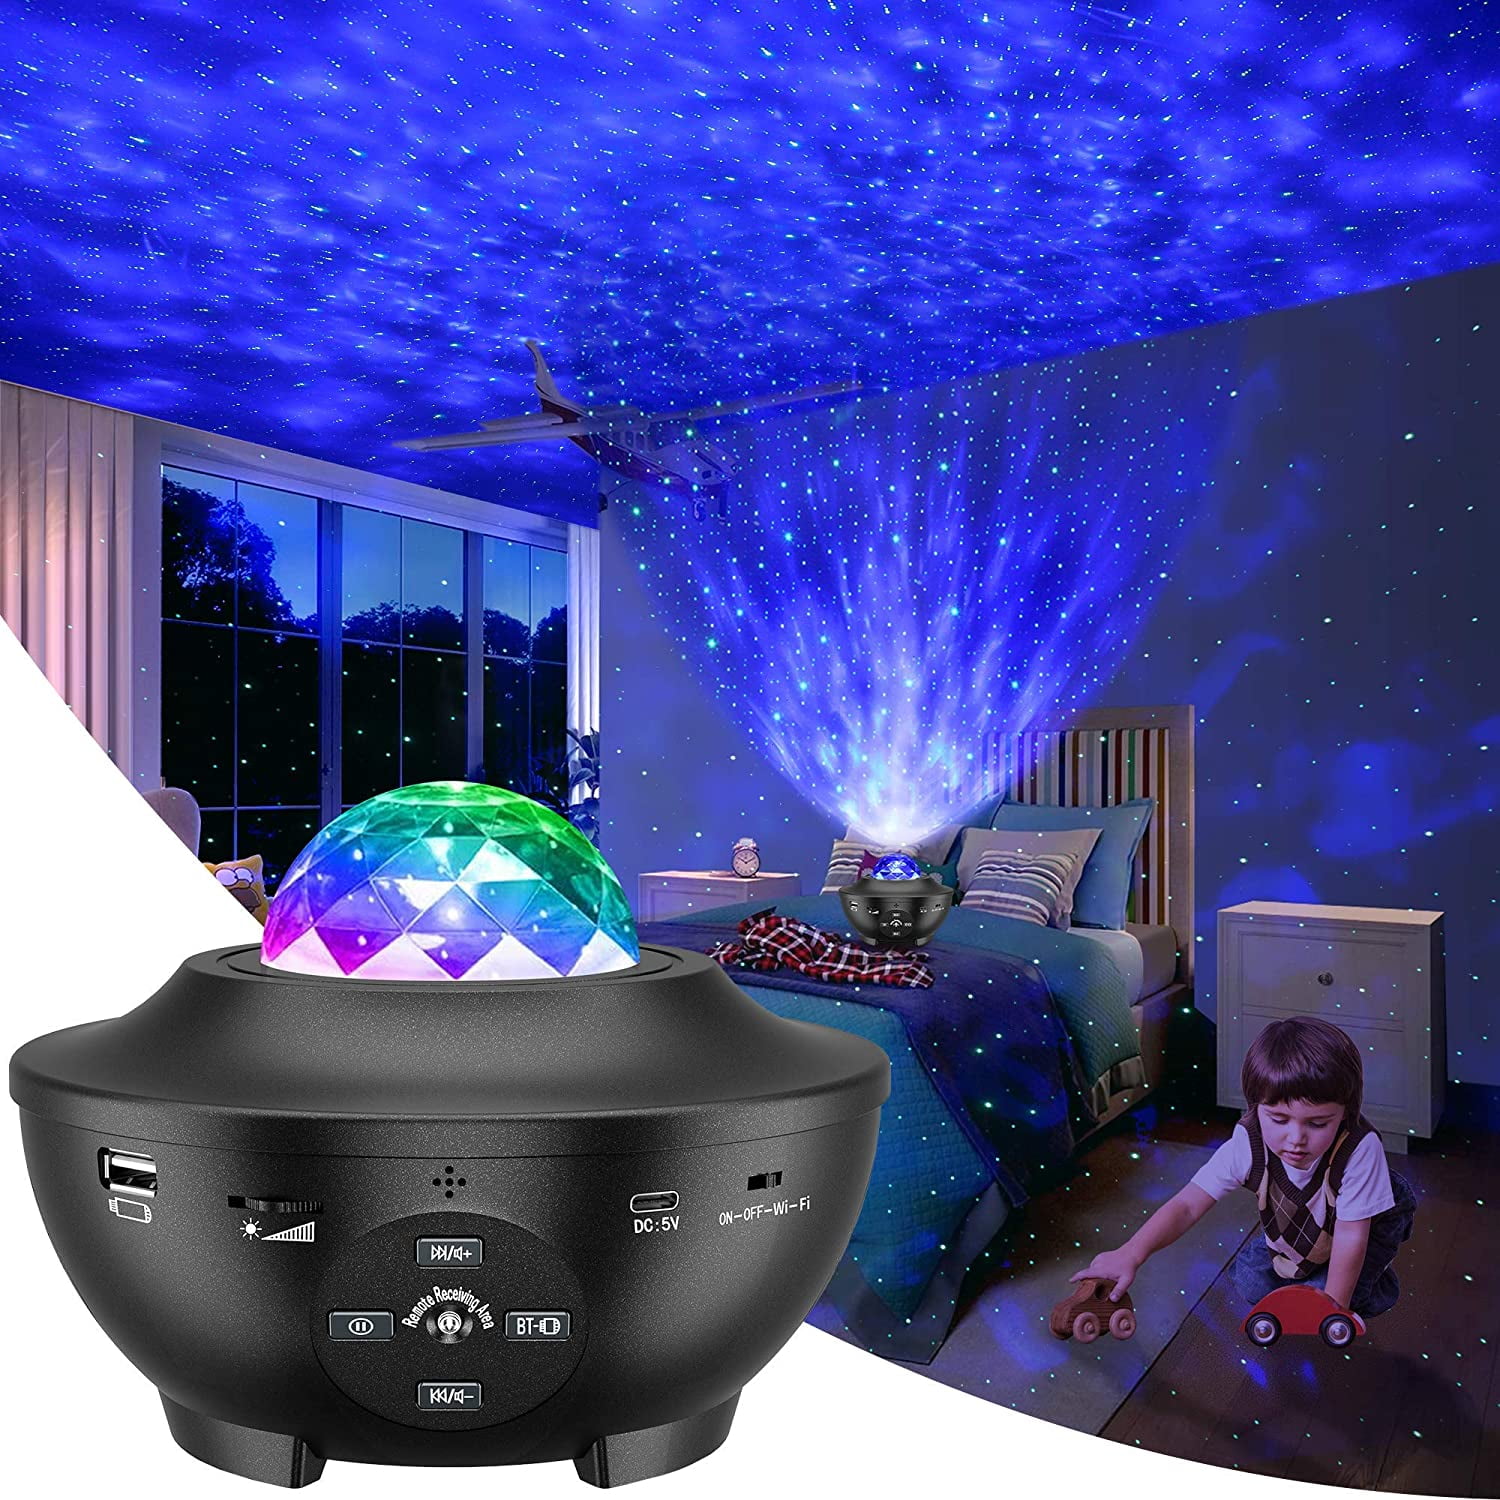 Perfect Gaming Room Lights with Epic Design ideas